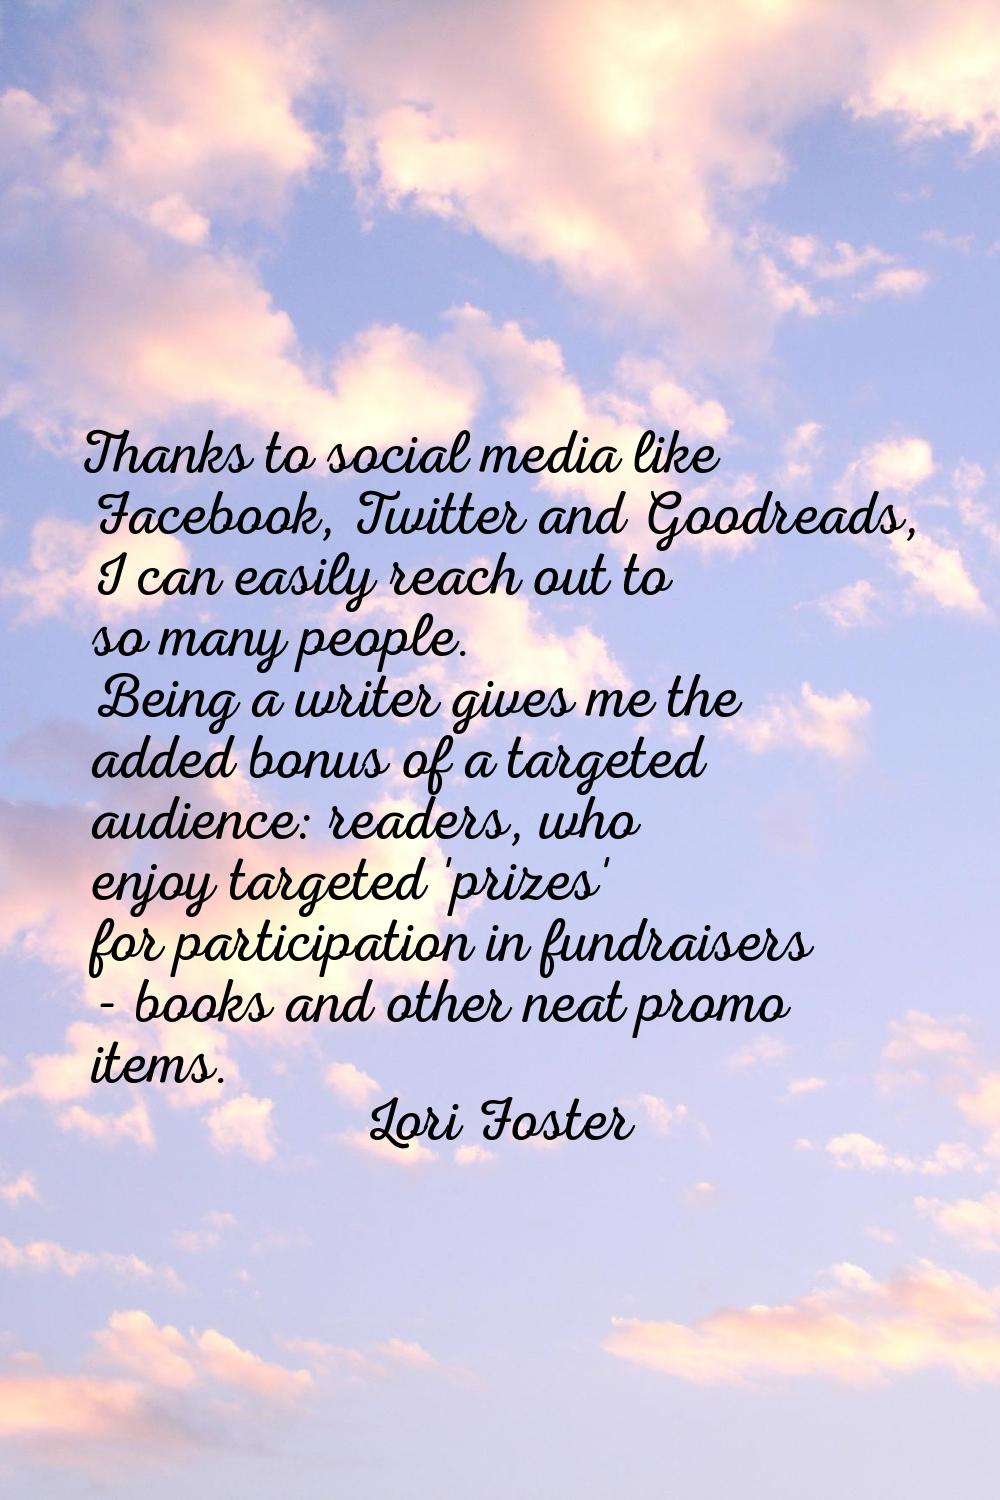 Thanks to social media like Facebook, Twitter and Goodreads, I can easily reach out to so many peop